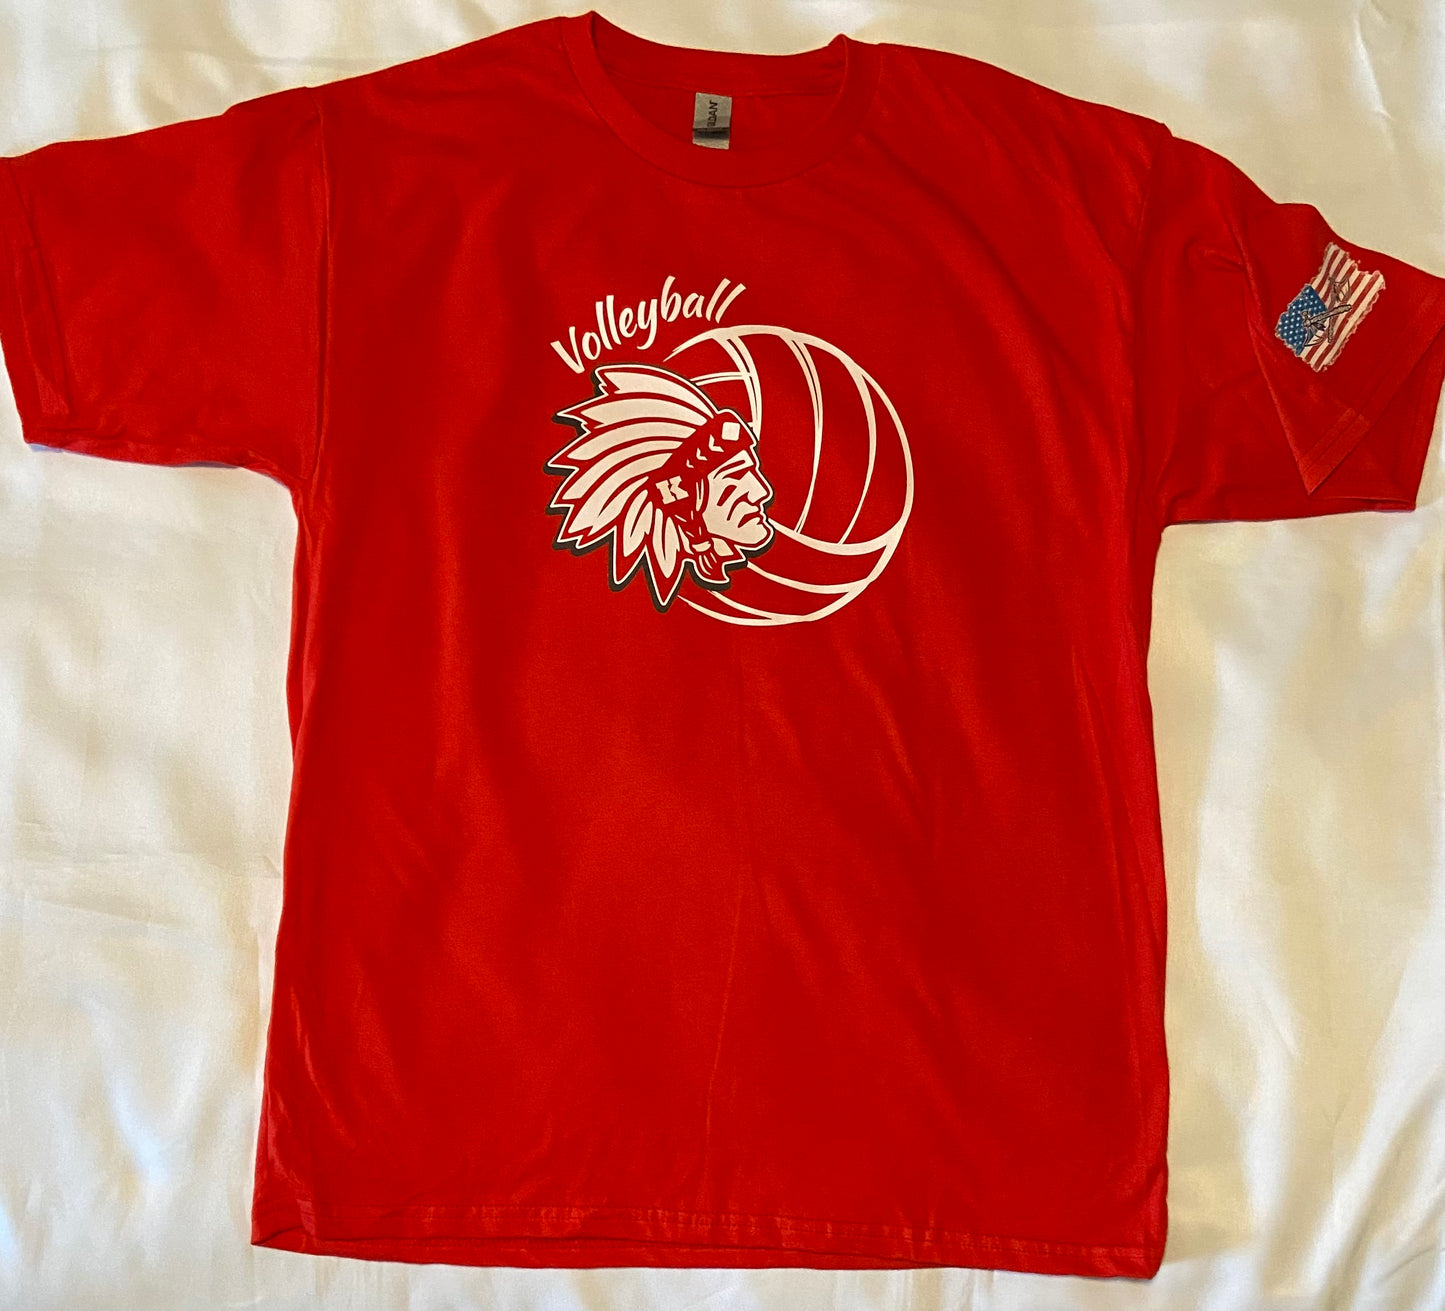 Knox Redskins VOLLEYBALL T-shirt - Red - Adult and Youth Sizes